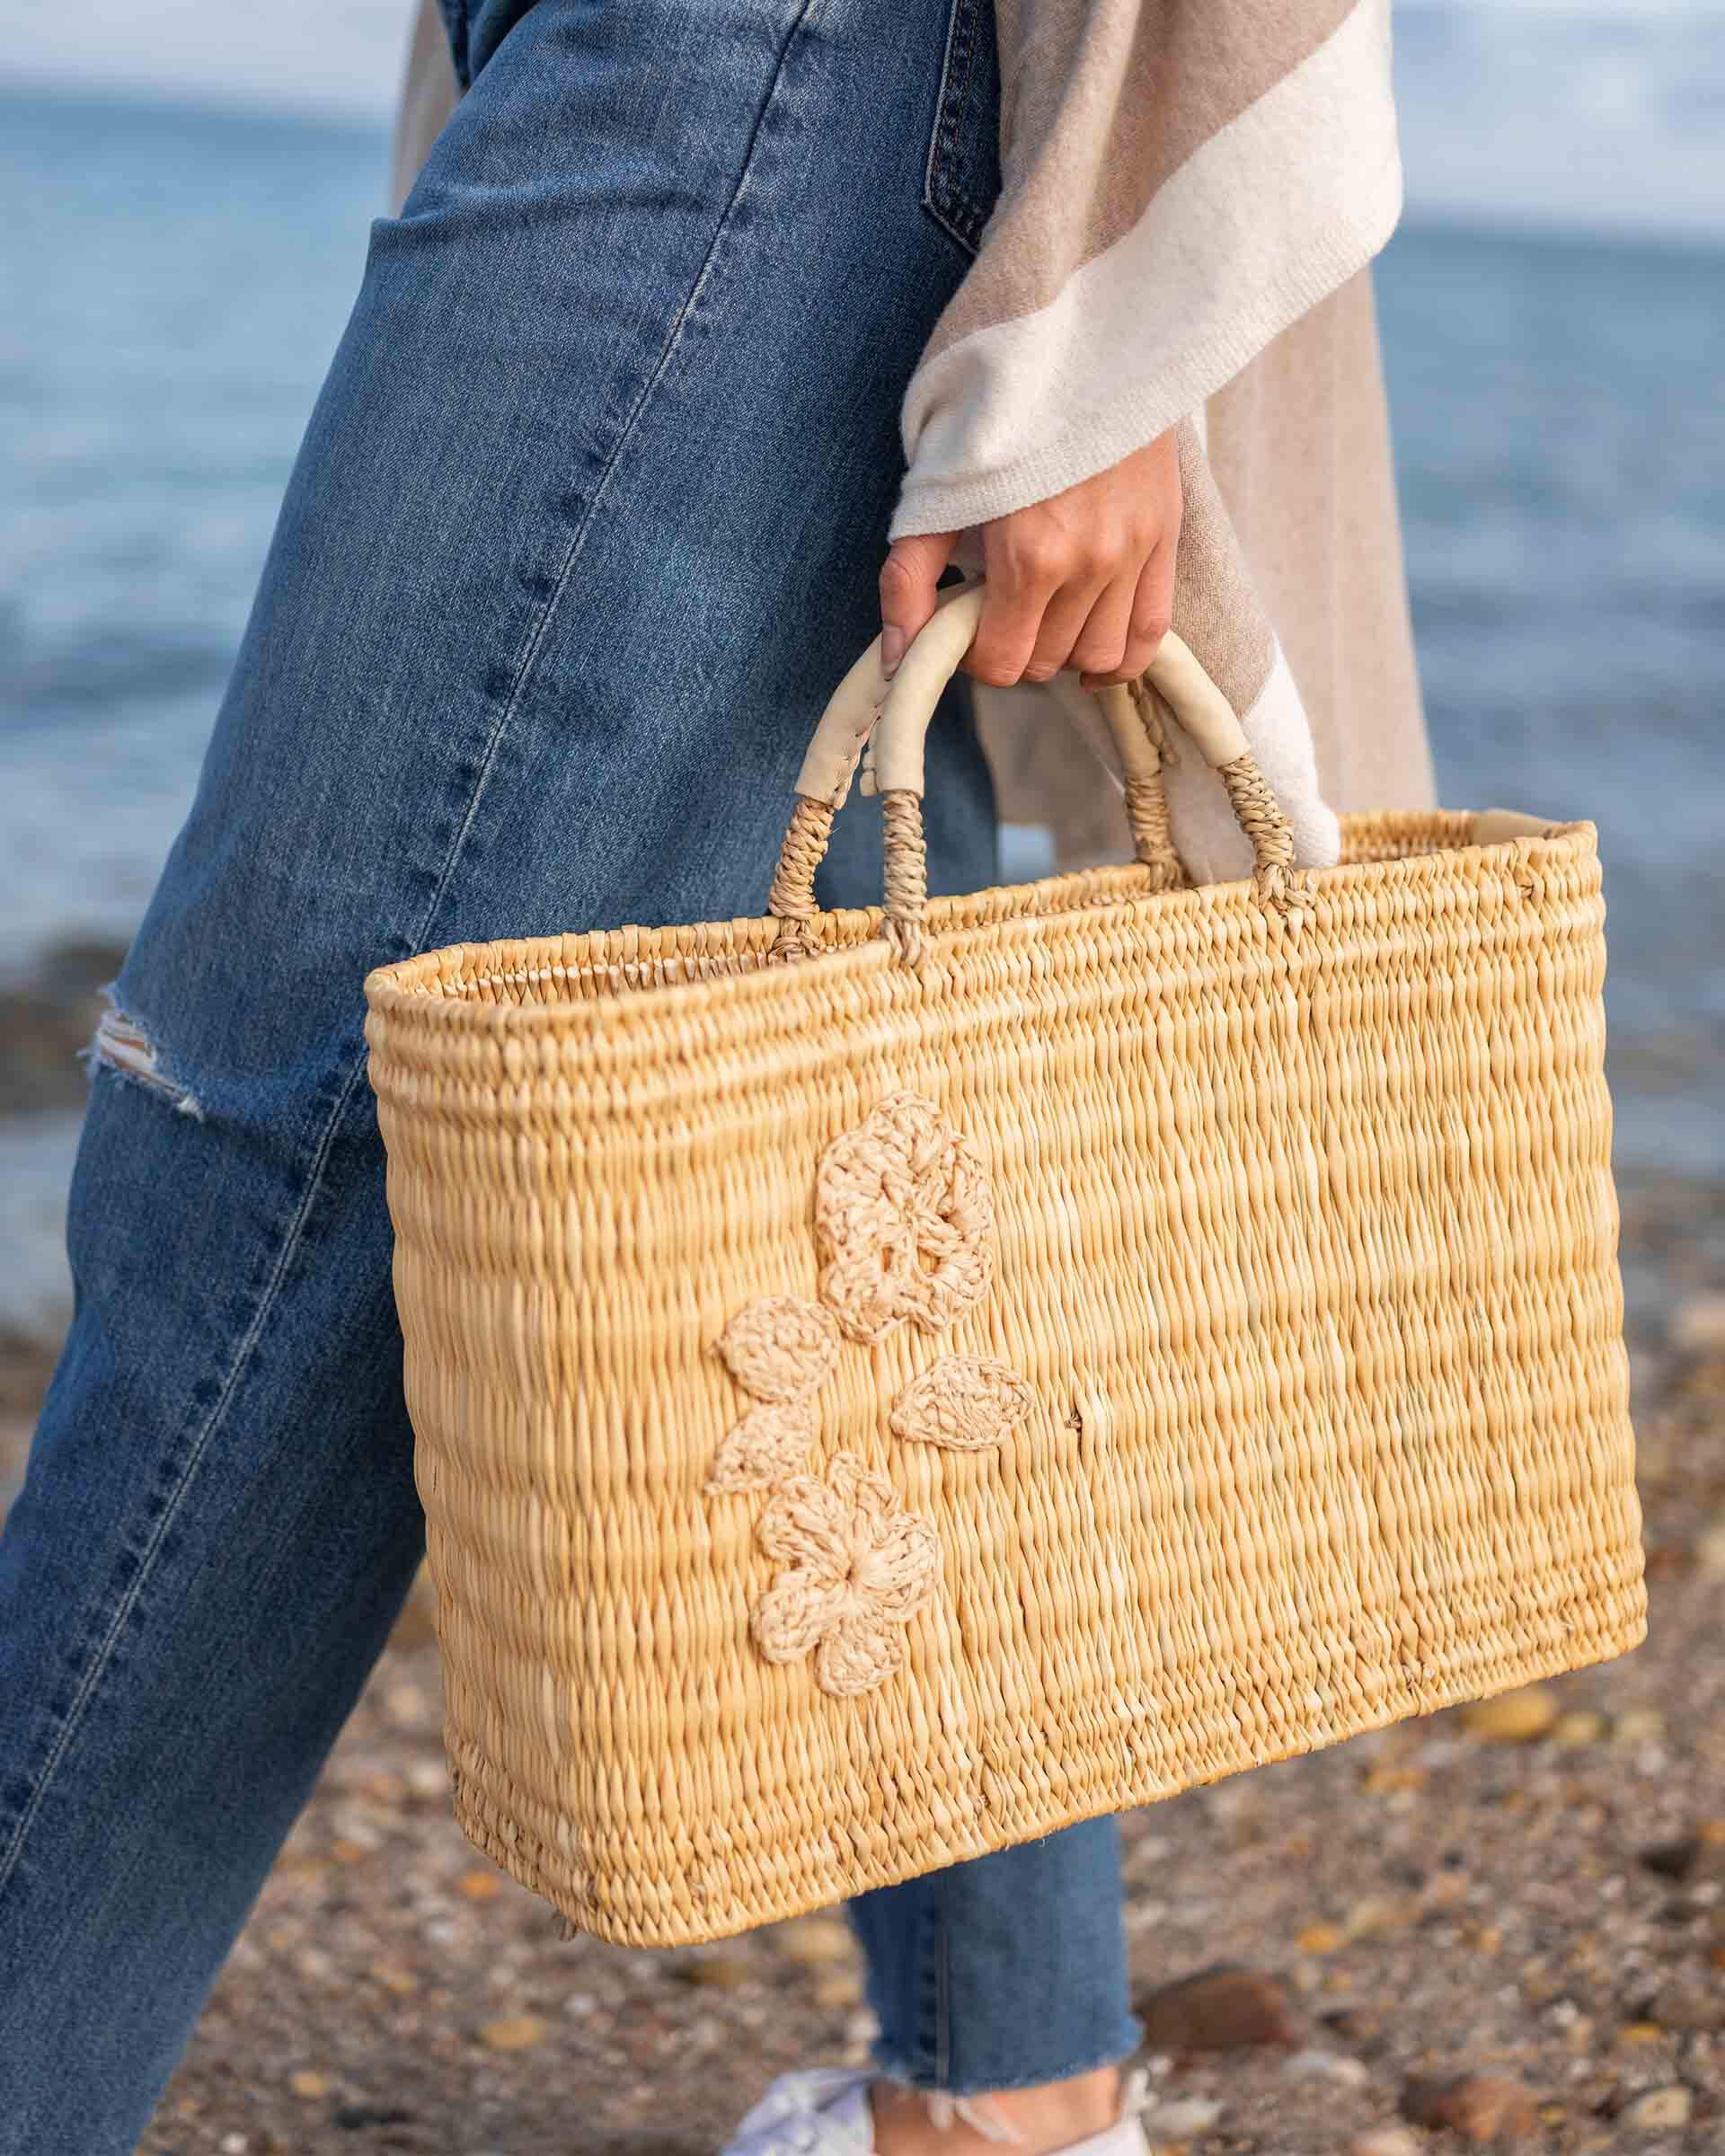 female holding medium sized straw basket with handwoven natural floral standing on beach